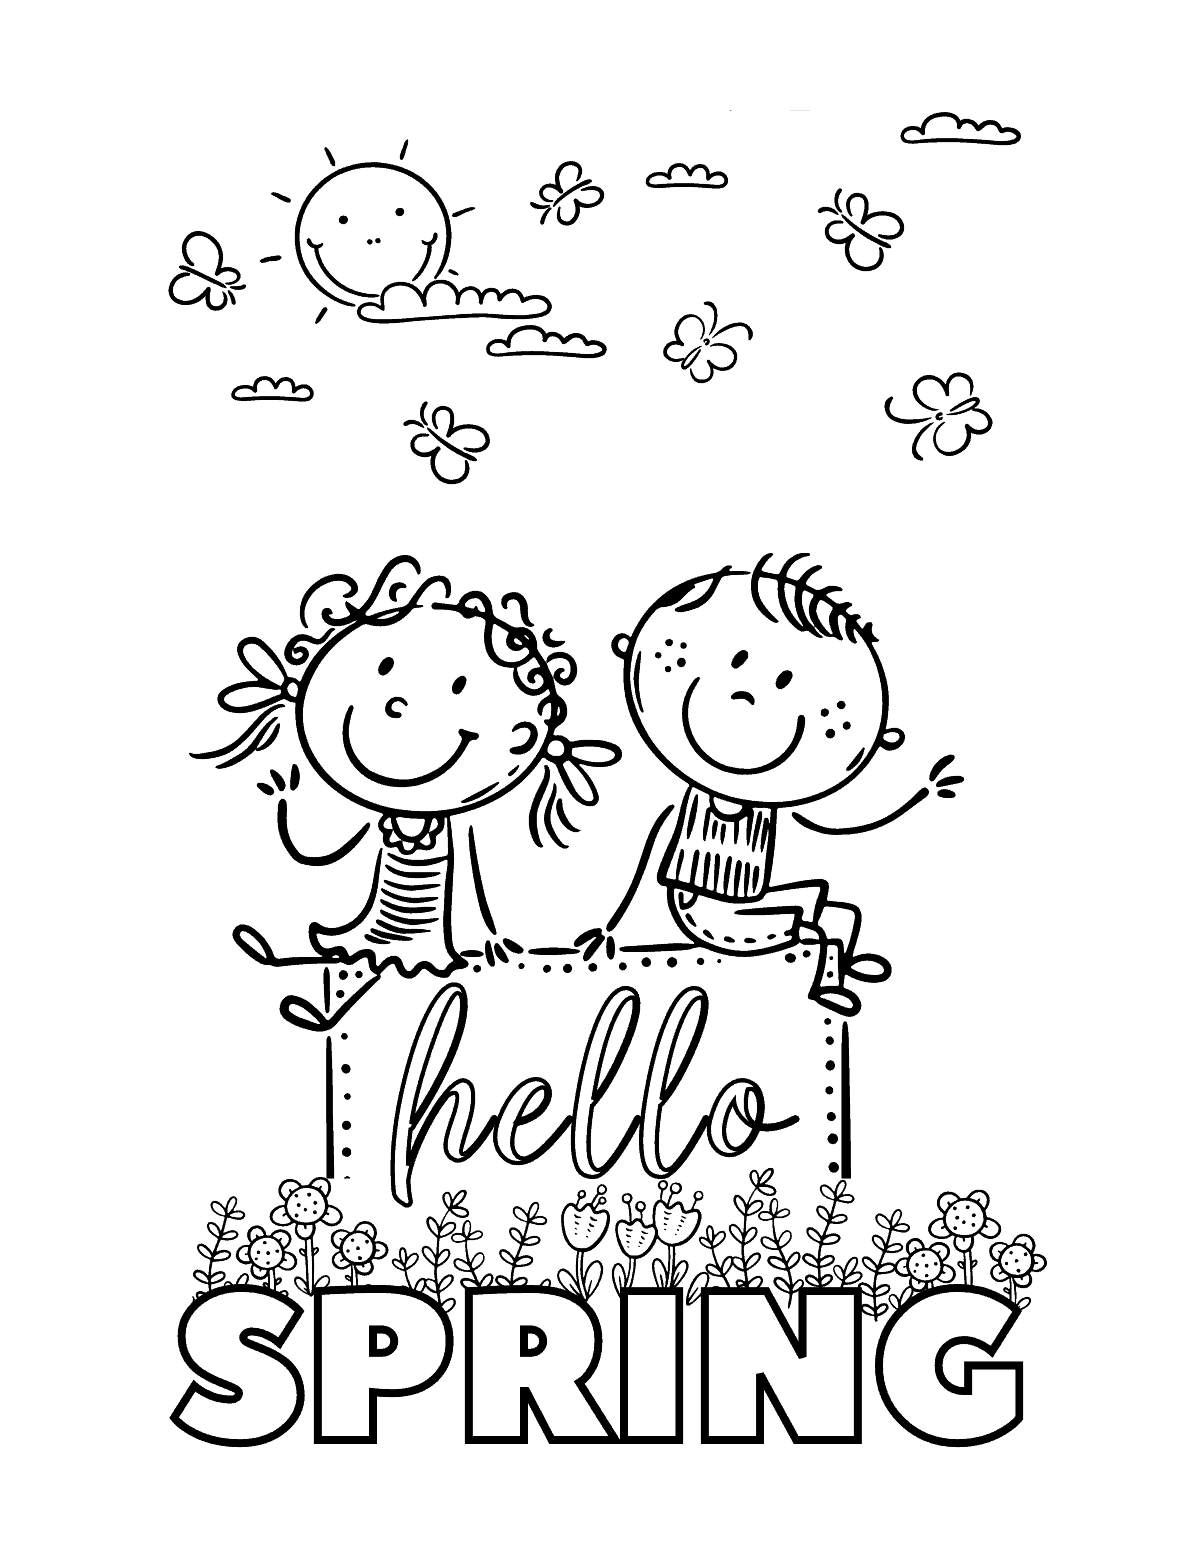 doodle of 2 kids with sign that says "Hello Spring."